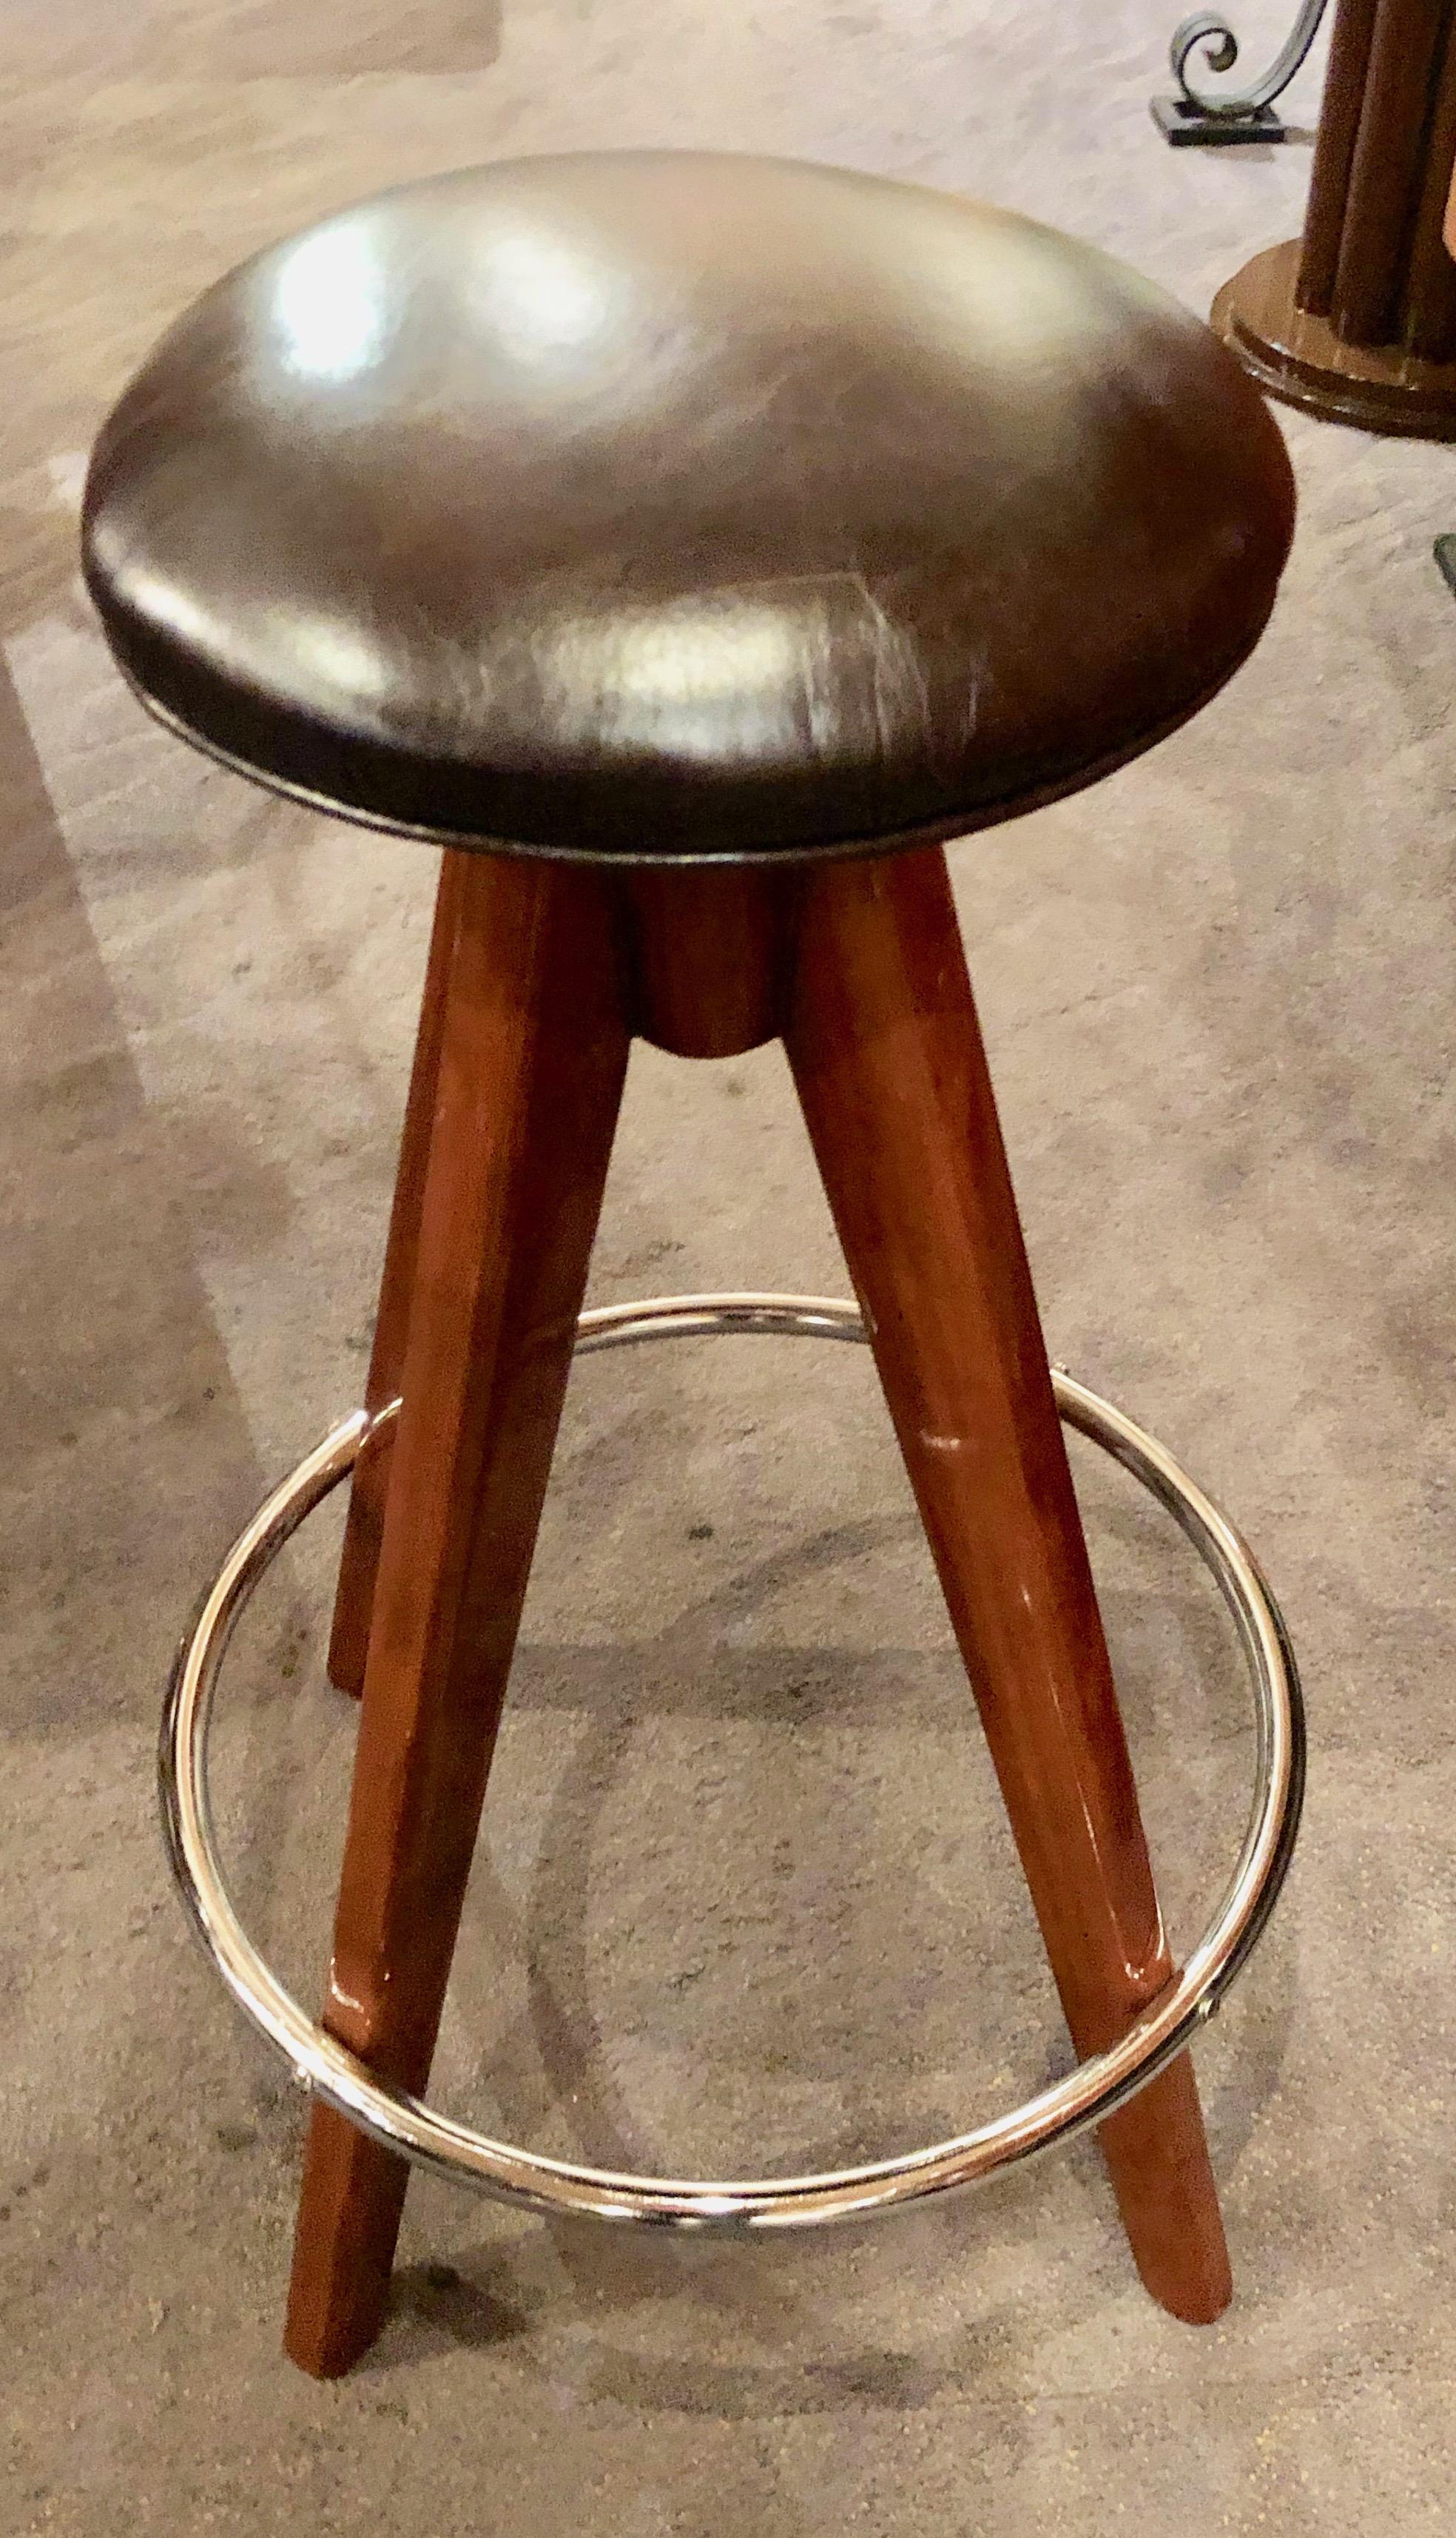 Three matching Art Deco style barstools in tripod shaped wood leg design with chrome band foot rest and brown leather tops. Newly made for our shop of high quality materials and workmanship. Very comfortable could be used in any stand up or stand